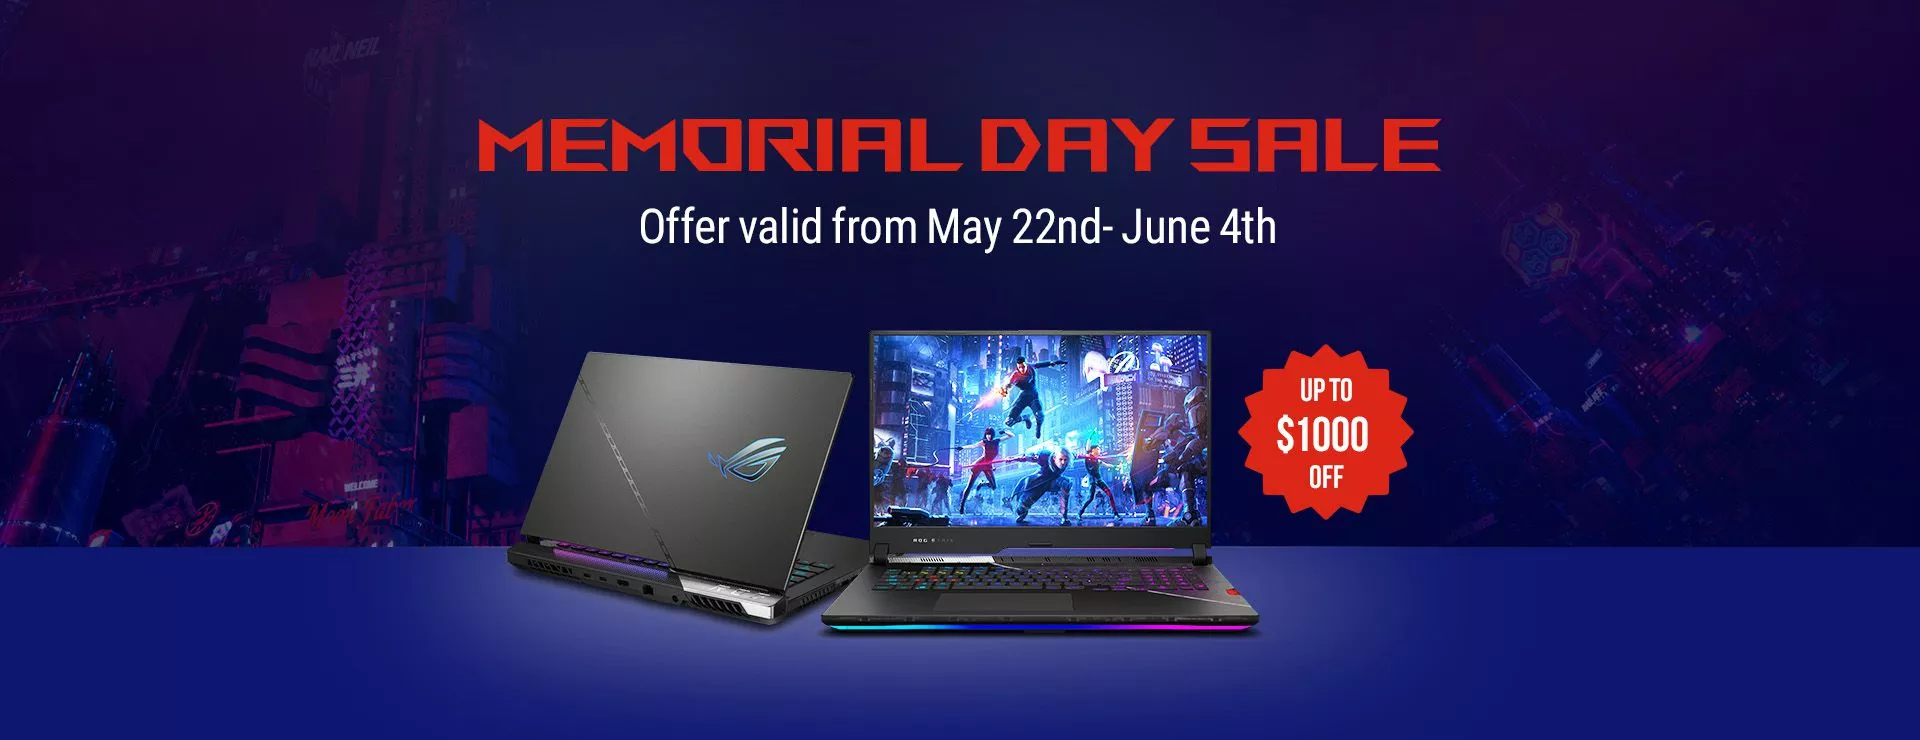 Memorial Day Sale 2023 Image of 2 laptops  Offer valid from May 2-June 4  Up to $1000 Off